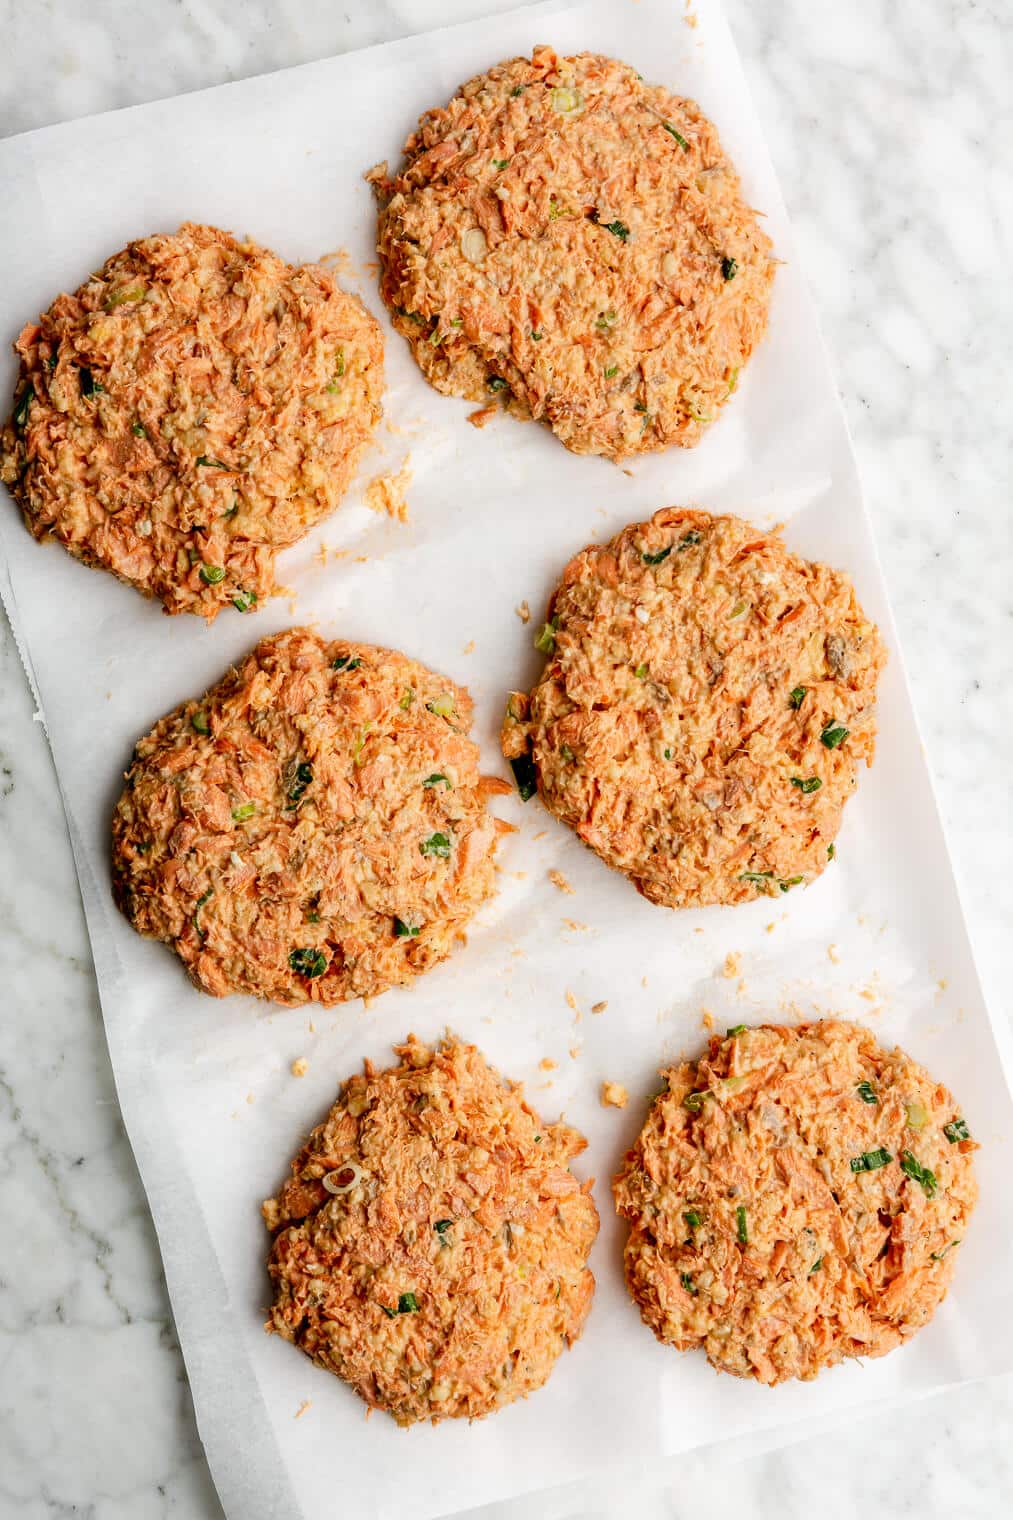 6 salmon cakes (before being cooked) on parchment paper.